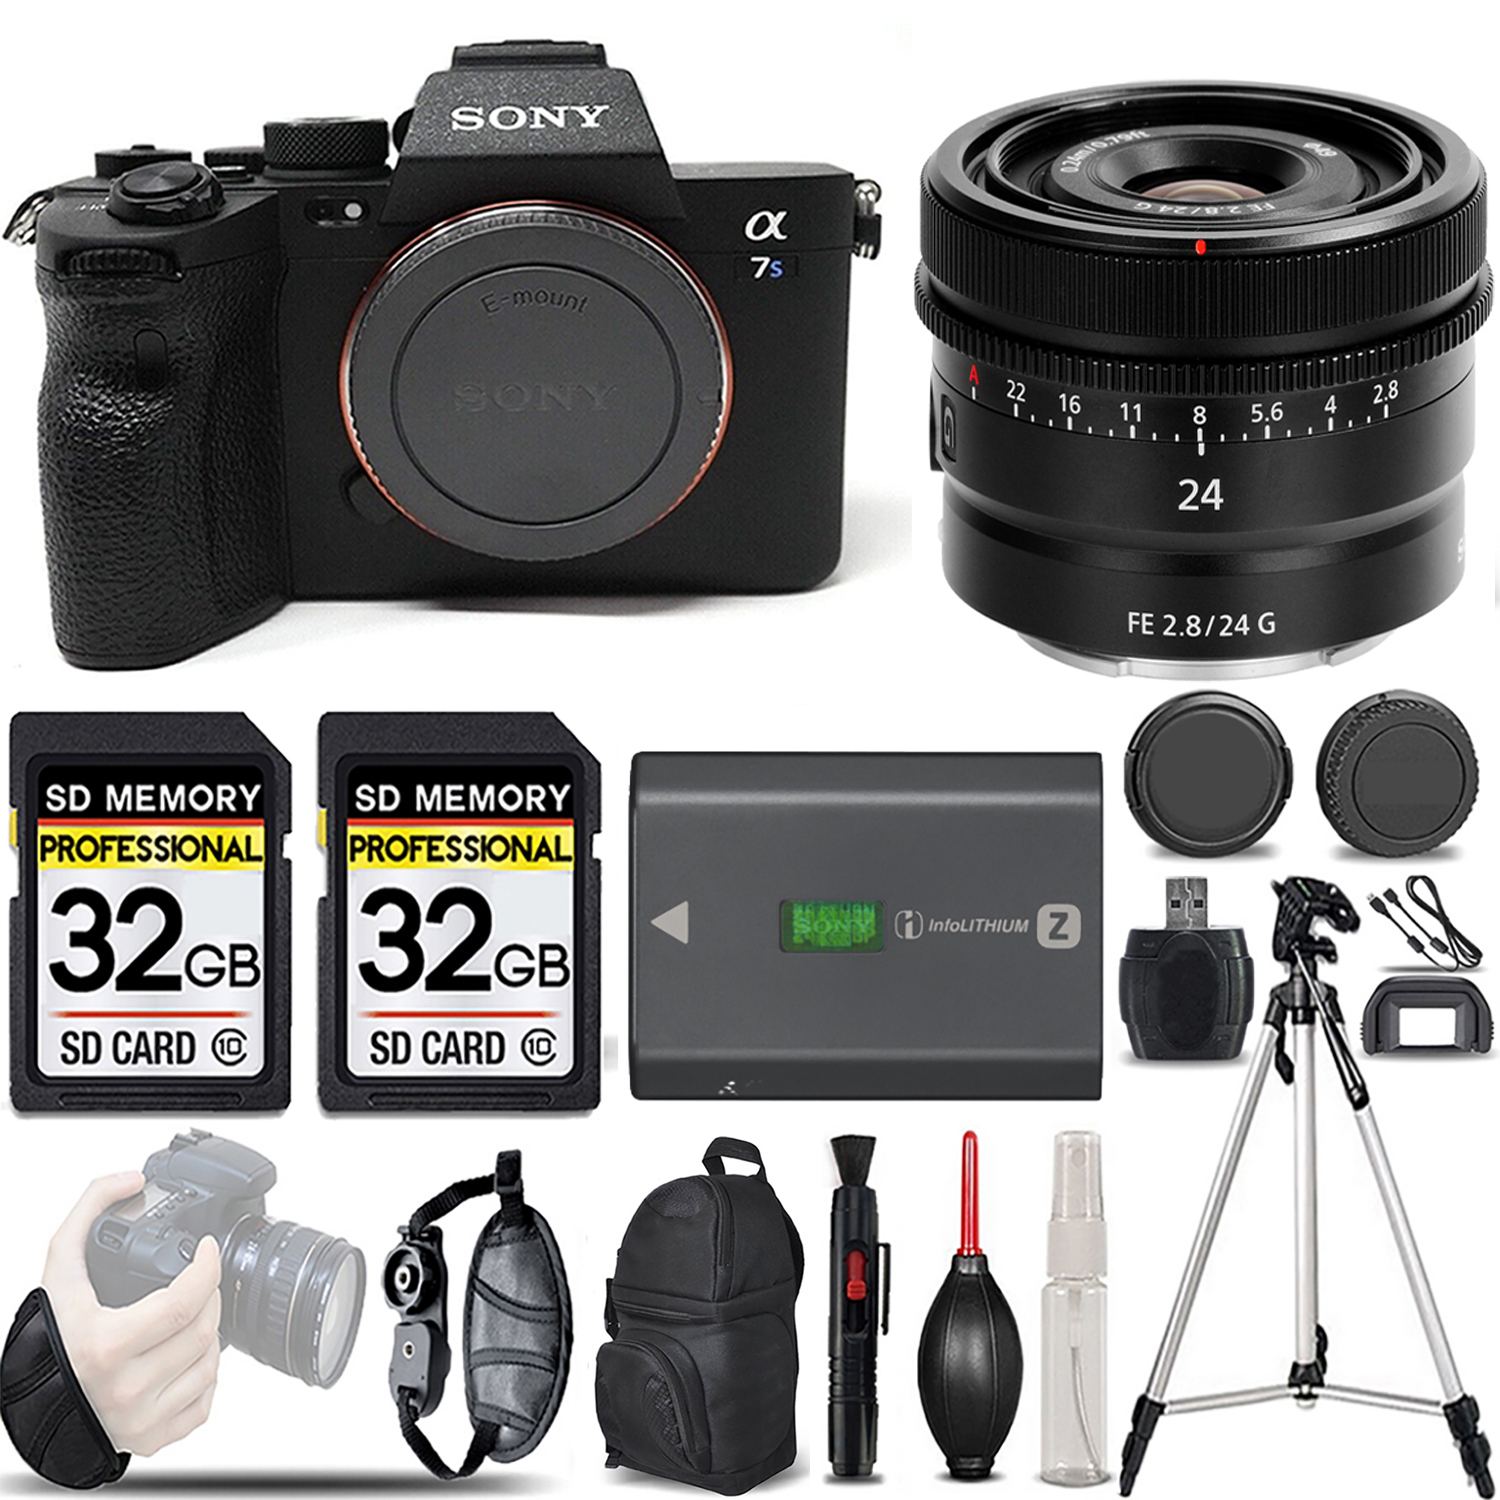 a7S III Mirrorless Camera + 24mm Lens + Extra Battery + 64GB -Basic Kit *FREE SHIPPING*